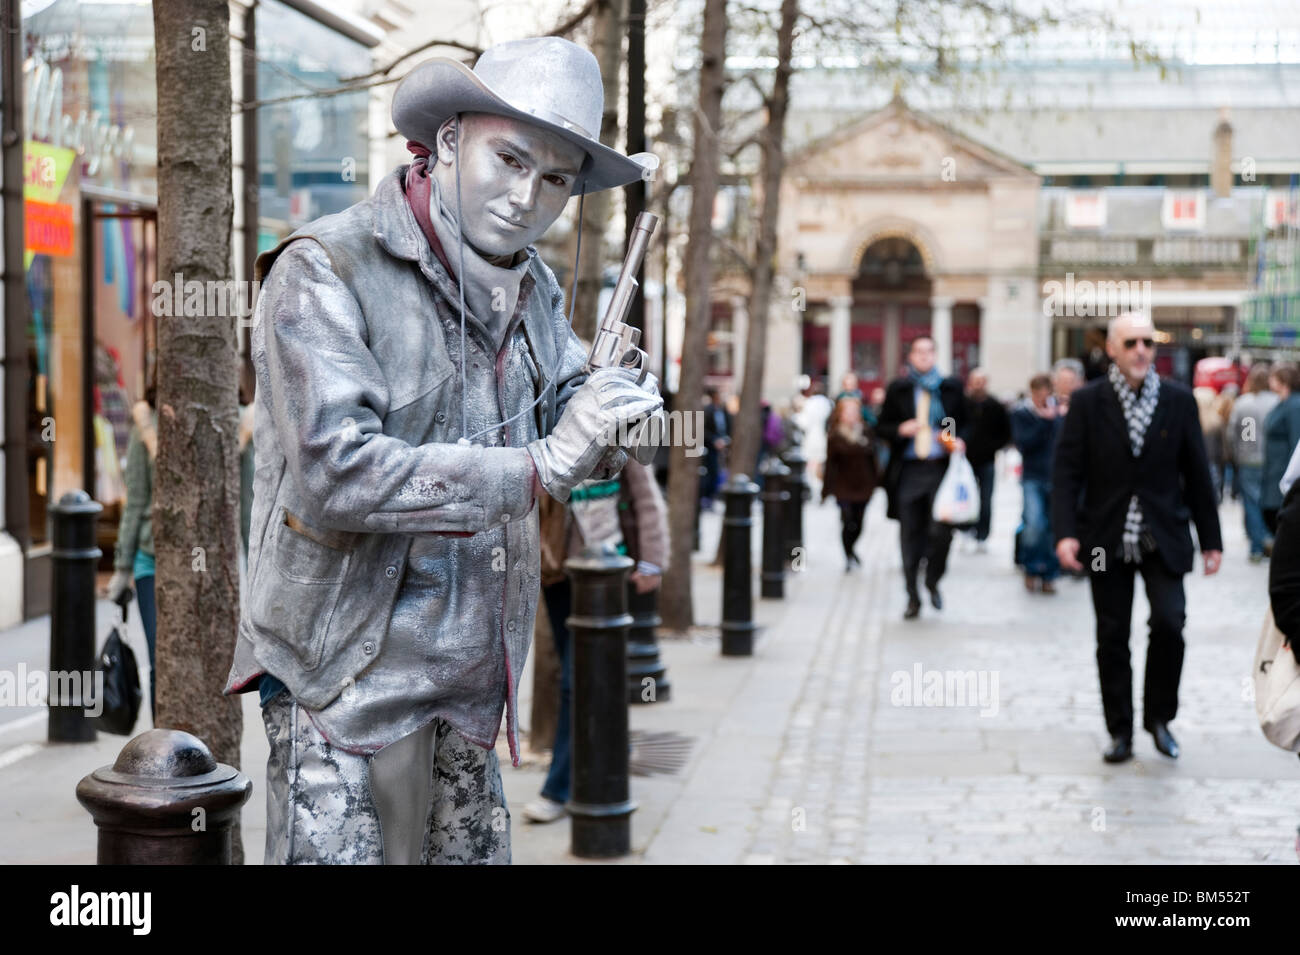 Silver painted human statue of a cowboy in Covent Garden, London, England, UK Stock Photo